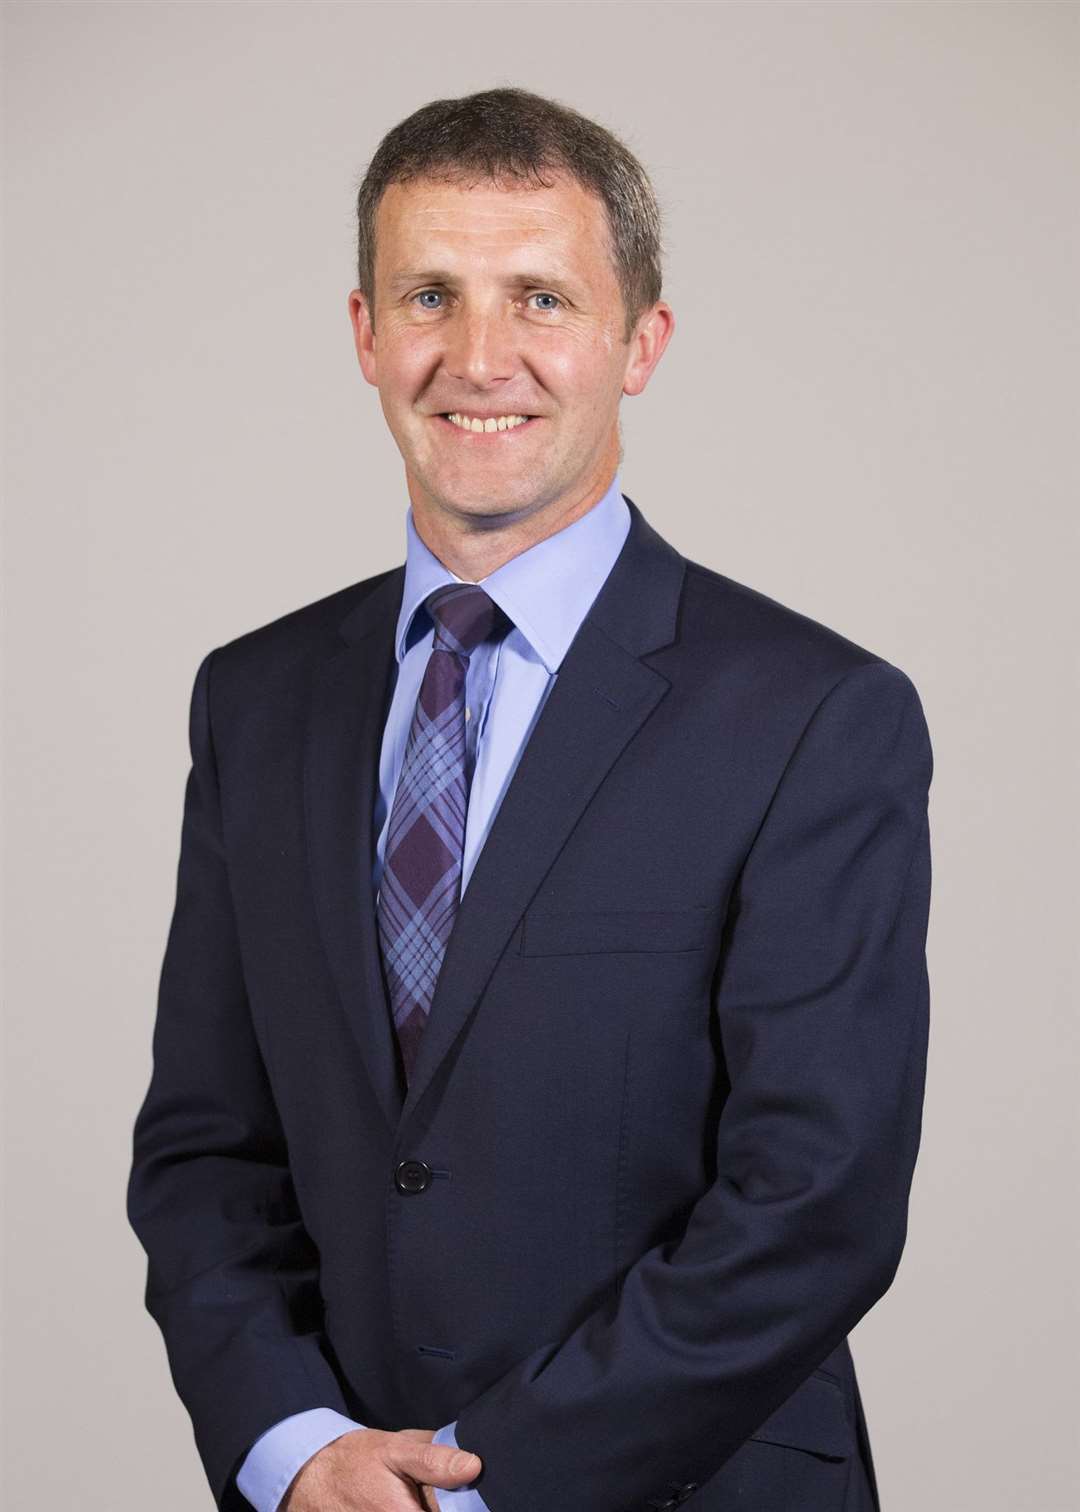 Cabinet secretary for transport, infrastructure and connectivity Michael Matheson.